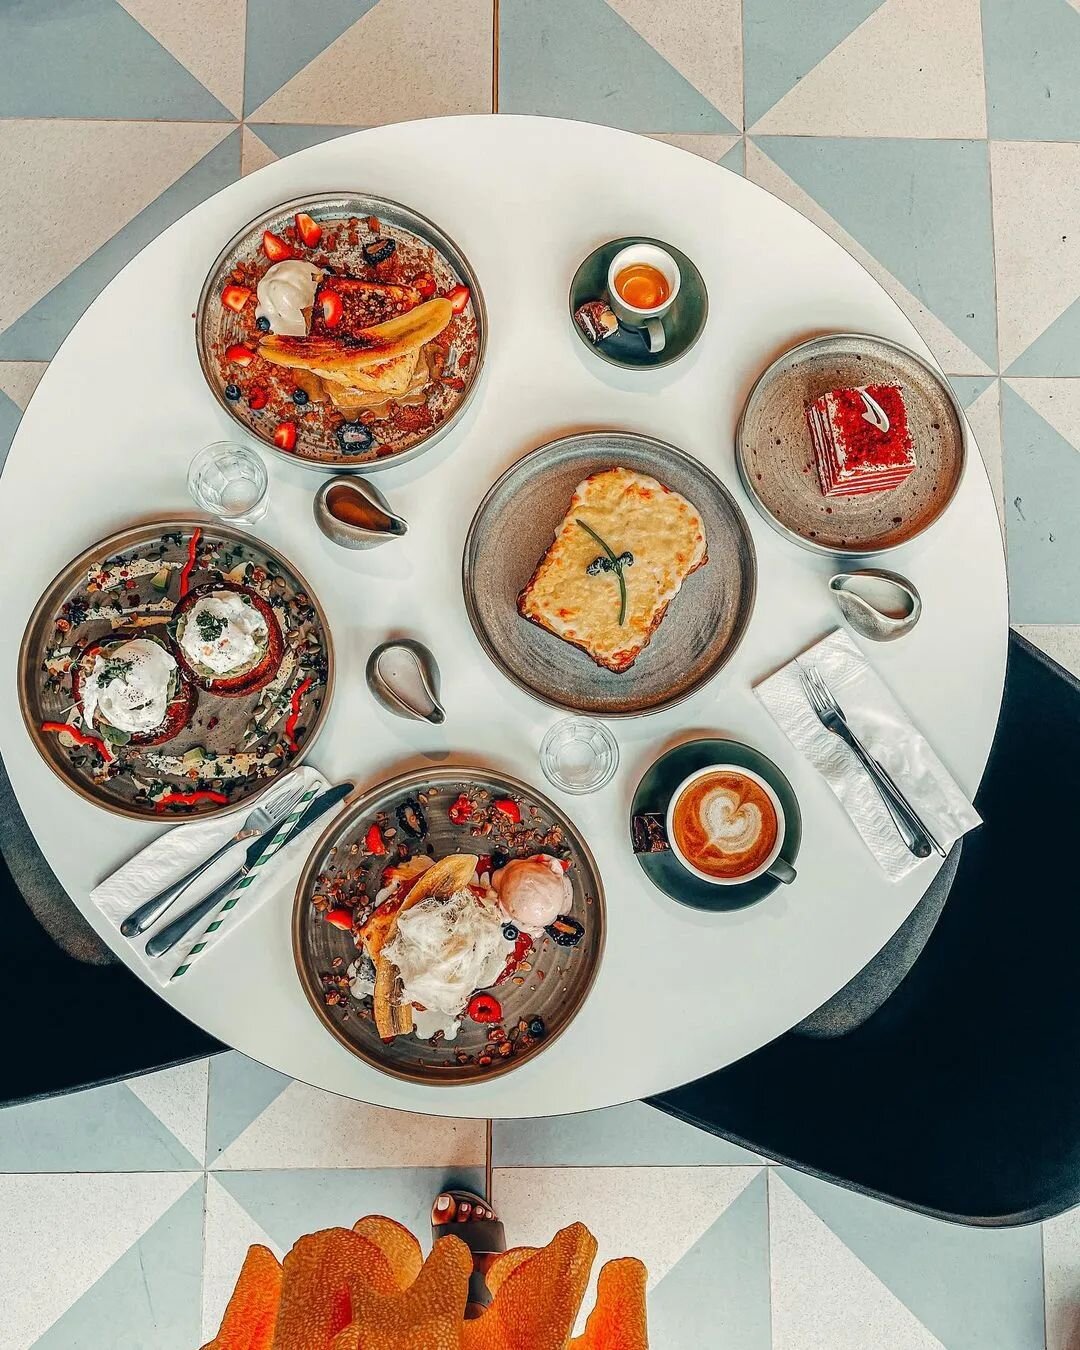 The best memories are always made around the table.

Join us at Hampstead for an all-day breakfast, lunch and mouth-watering desserts.

📸: @dxbreakfasts 

#thehampsteadway 
#mydubailifestyle 
#mydubai 
#dxbbreakfasts 
#foodies 
#foodiesofinstagram